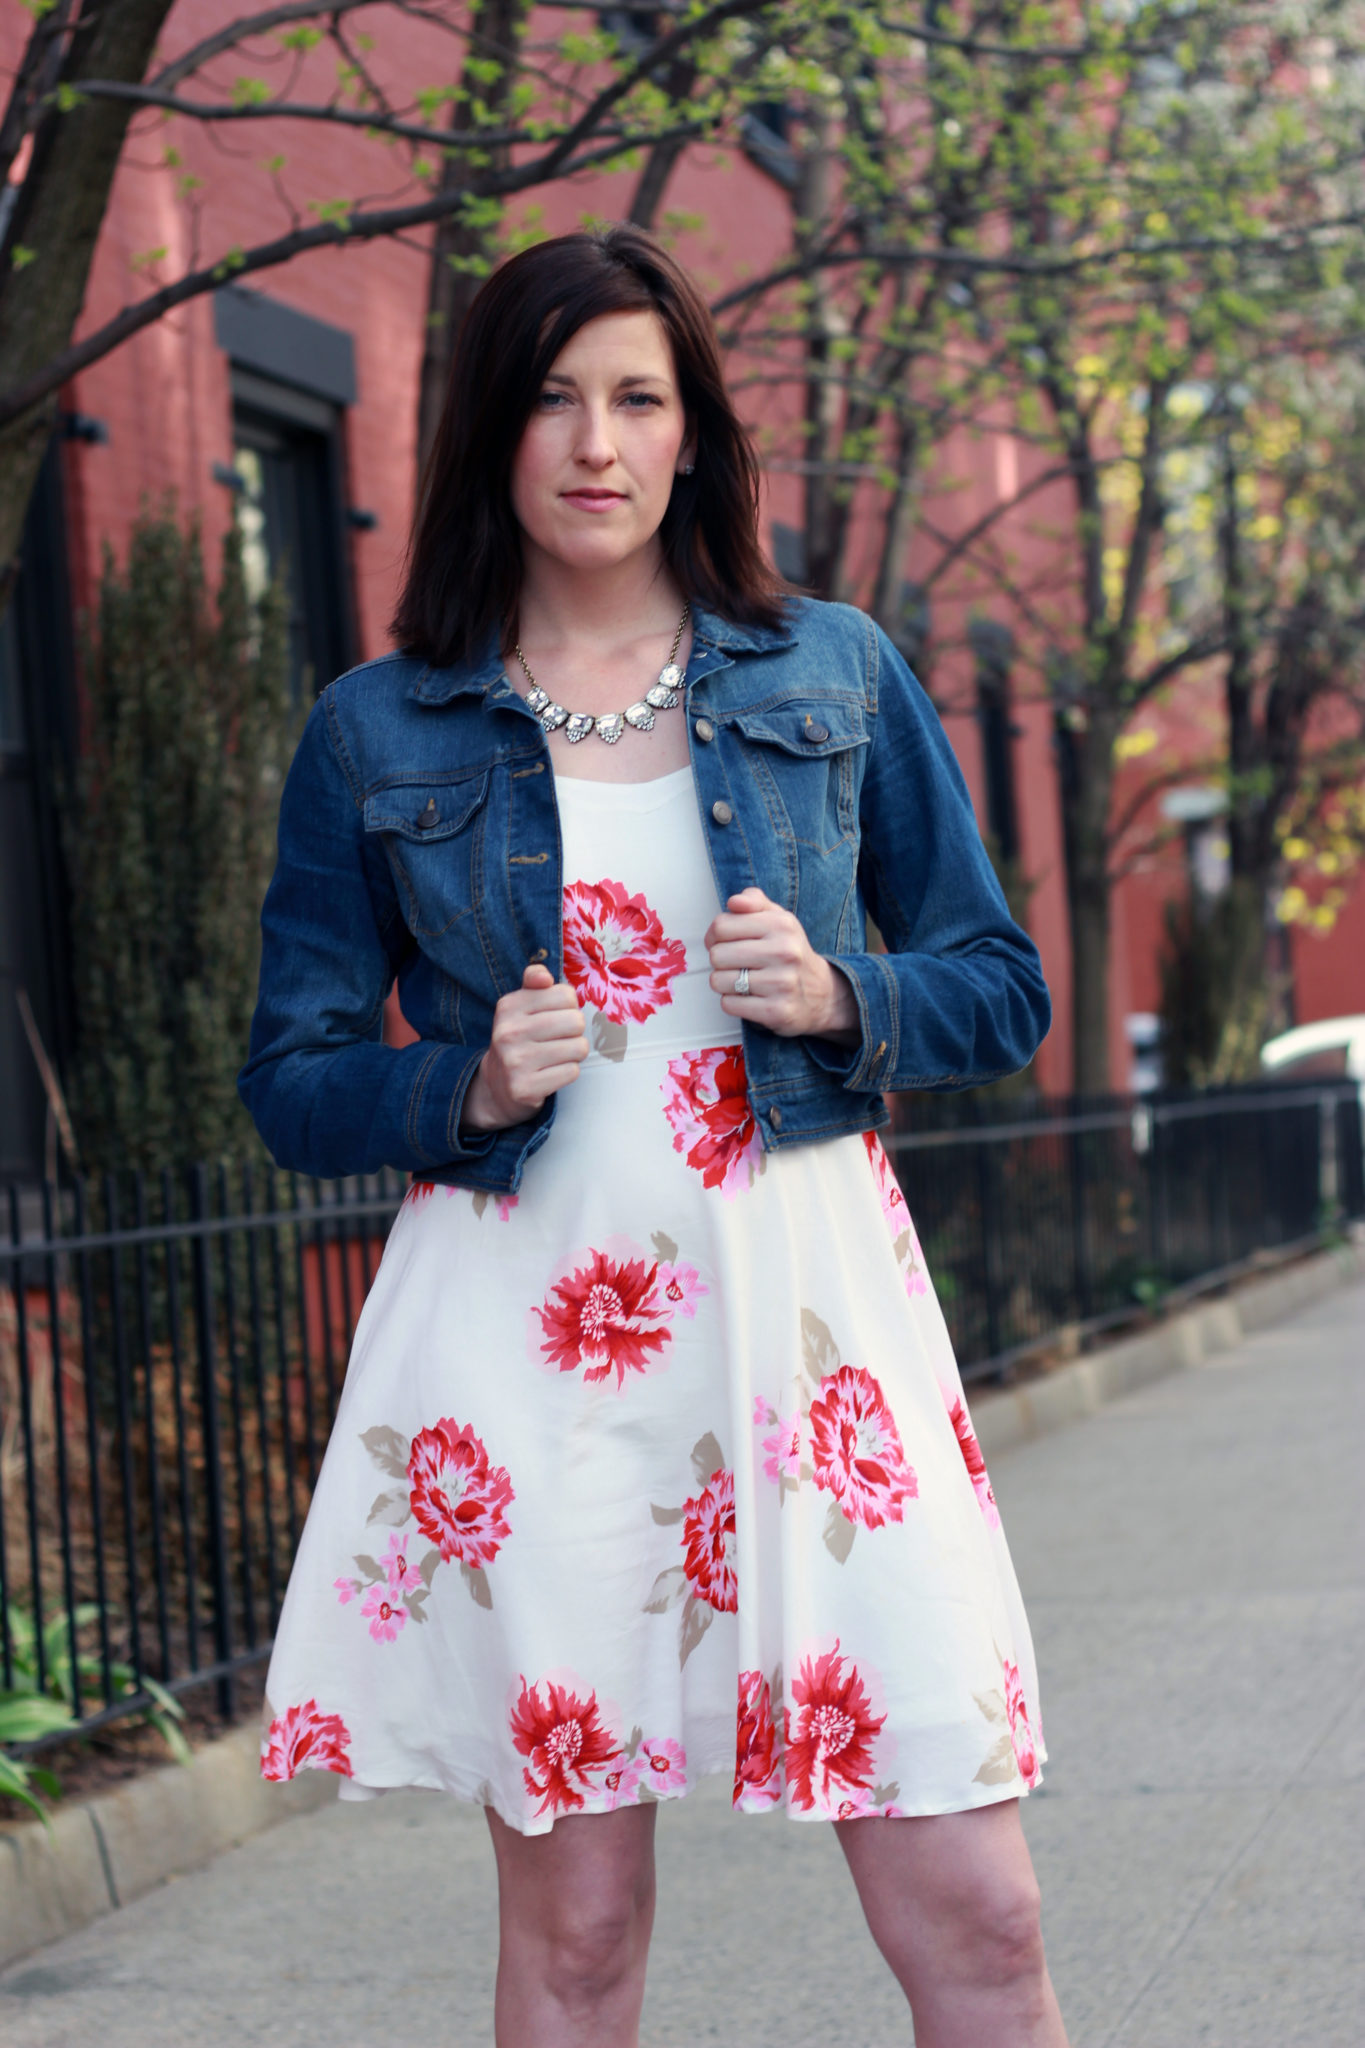 Fab Favorites Link Up: Floral Dress And Blush Purse